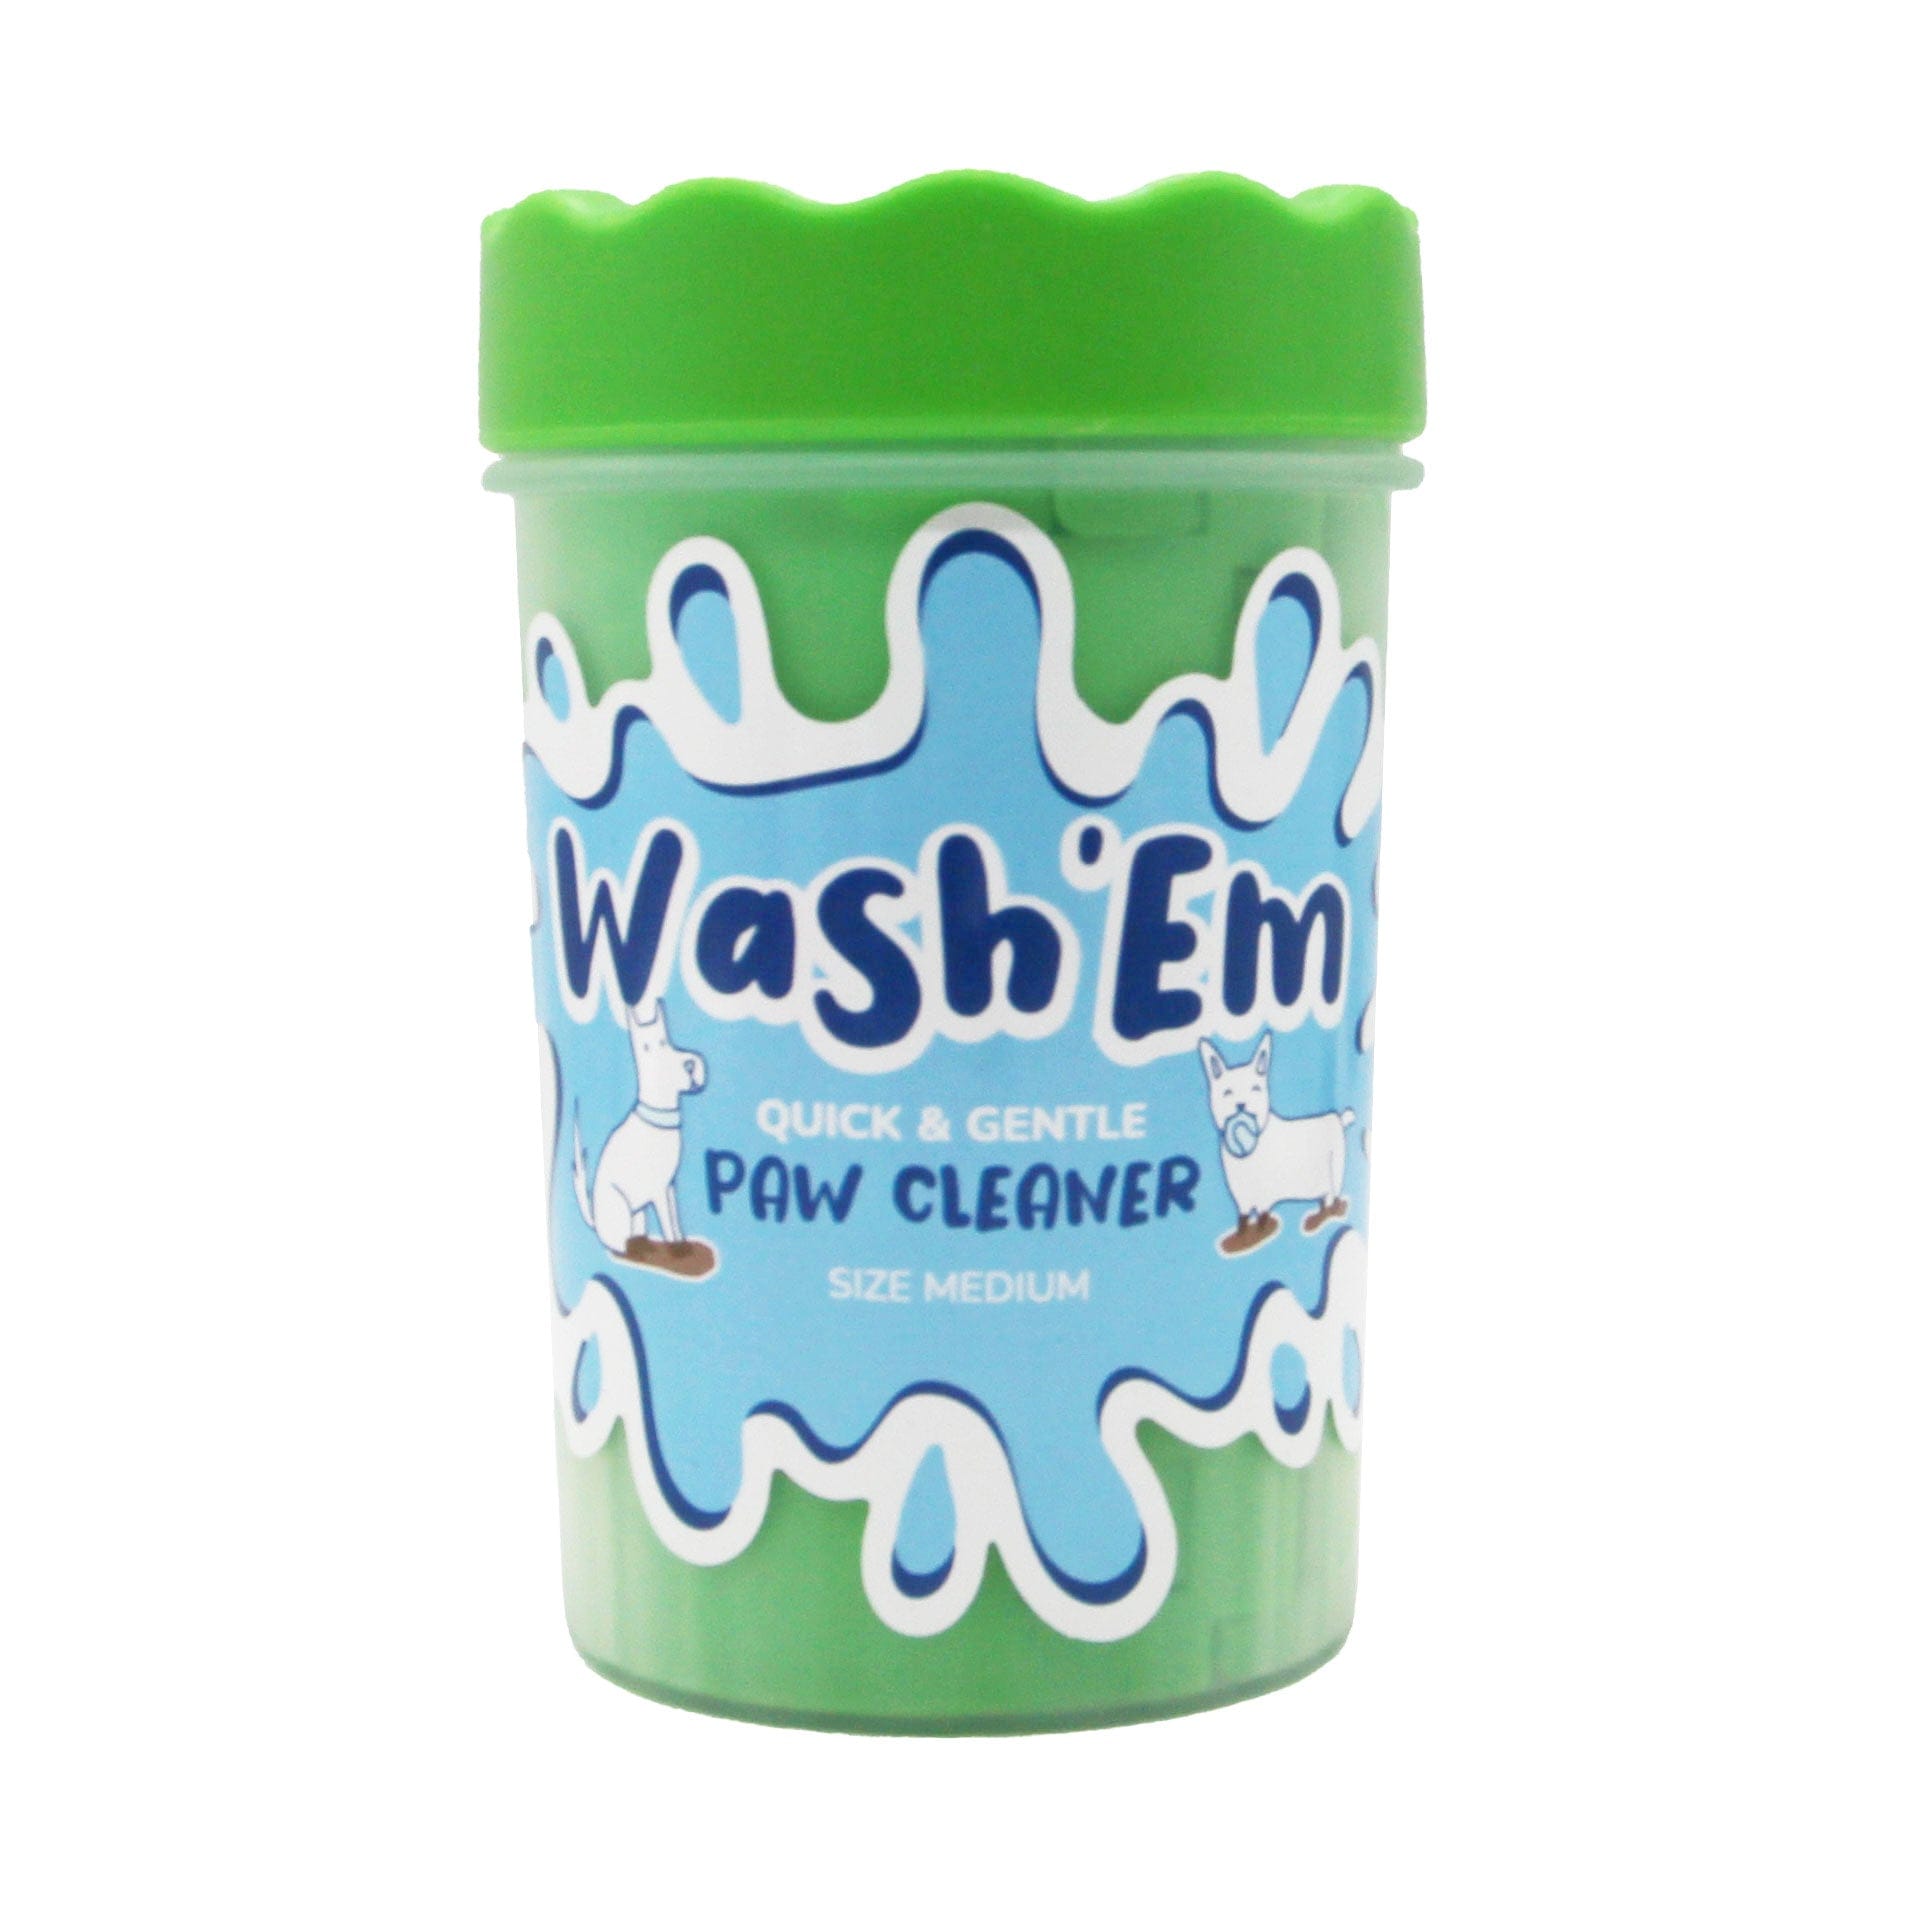 Wash’Em paw cleaner for dogs